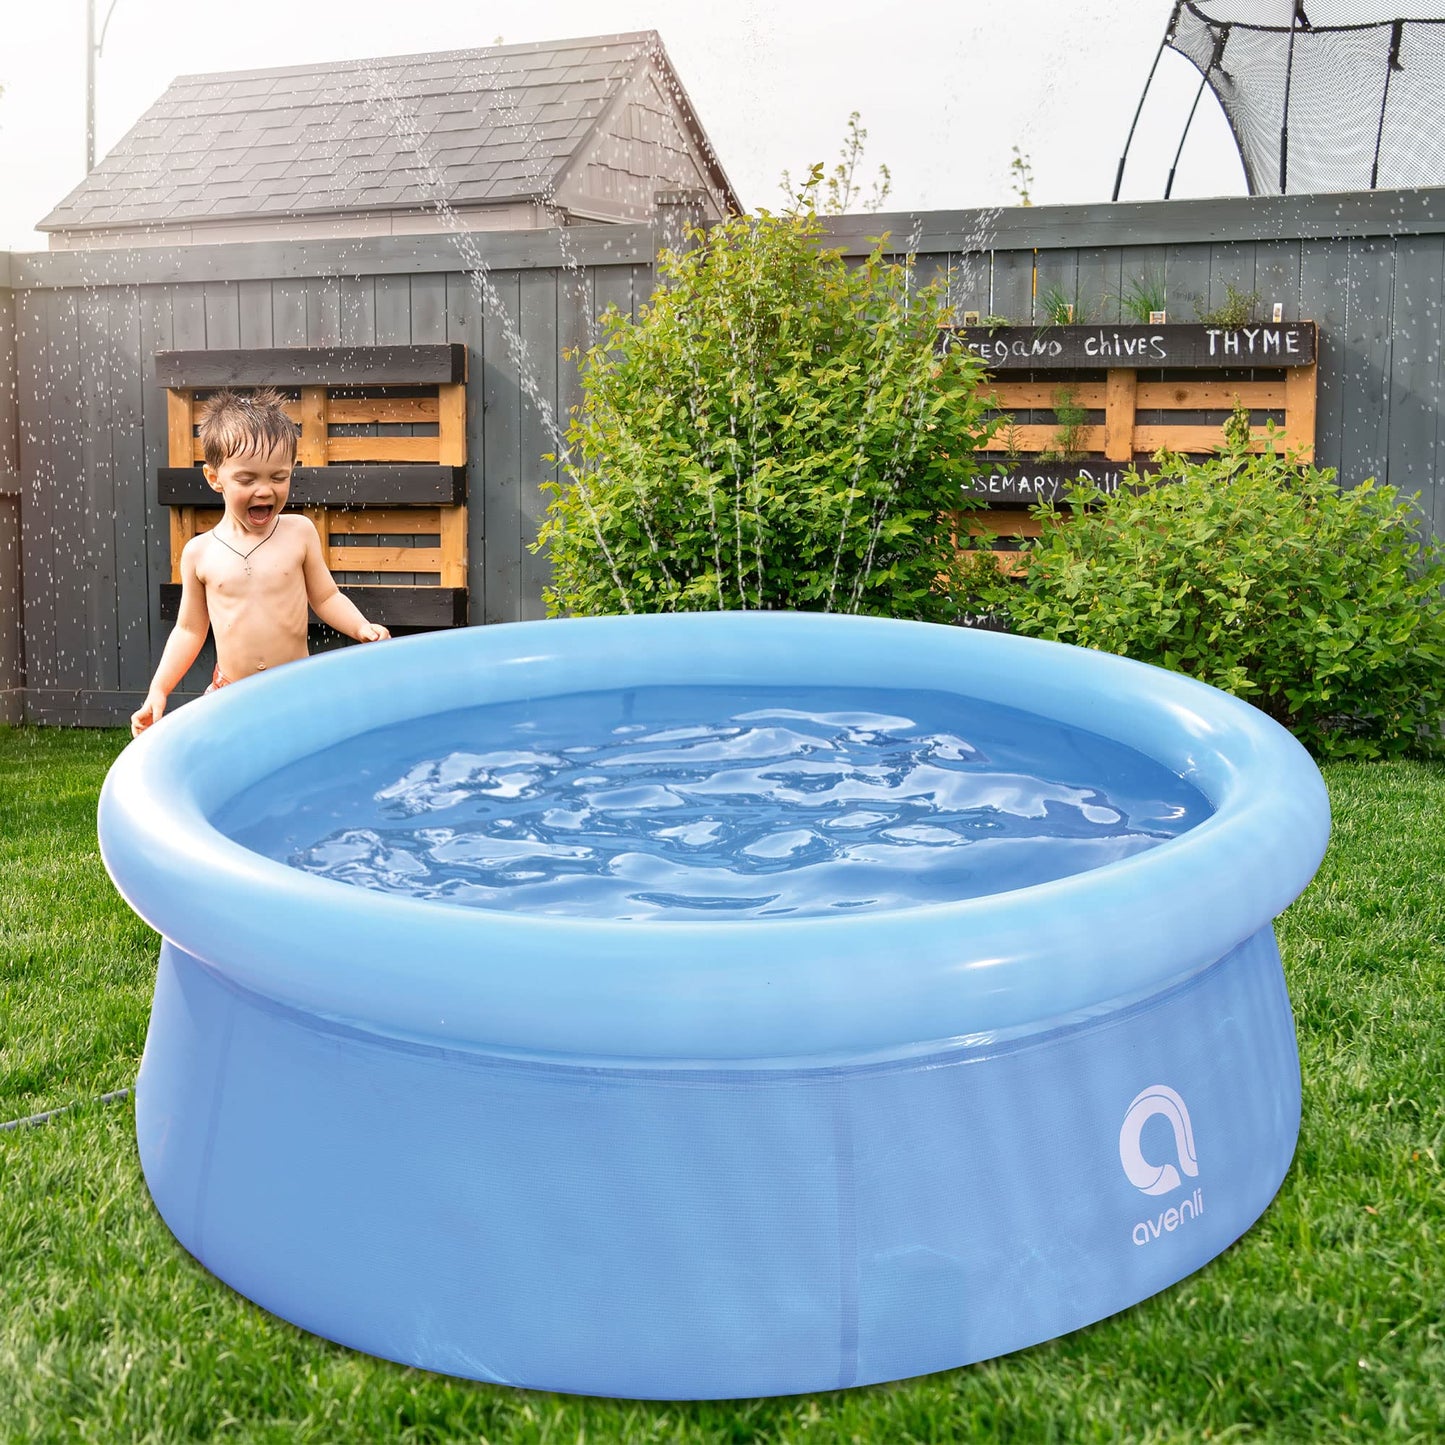 JLeisure Avenli 12014 5.5 Foot x 20 Inch 1 to 2 Person Capacity Prompt Set Kids Above Ground Inflatable Outdoor Backyard Kiddie Swimming Pool, Blue